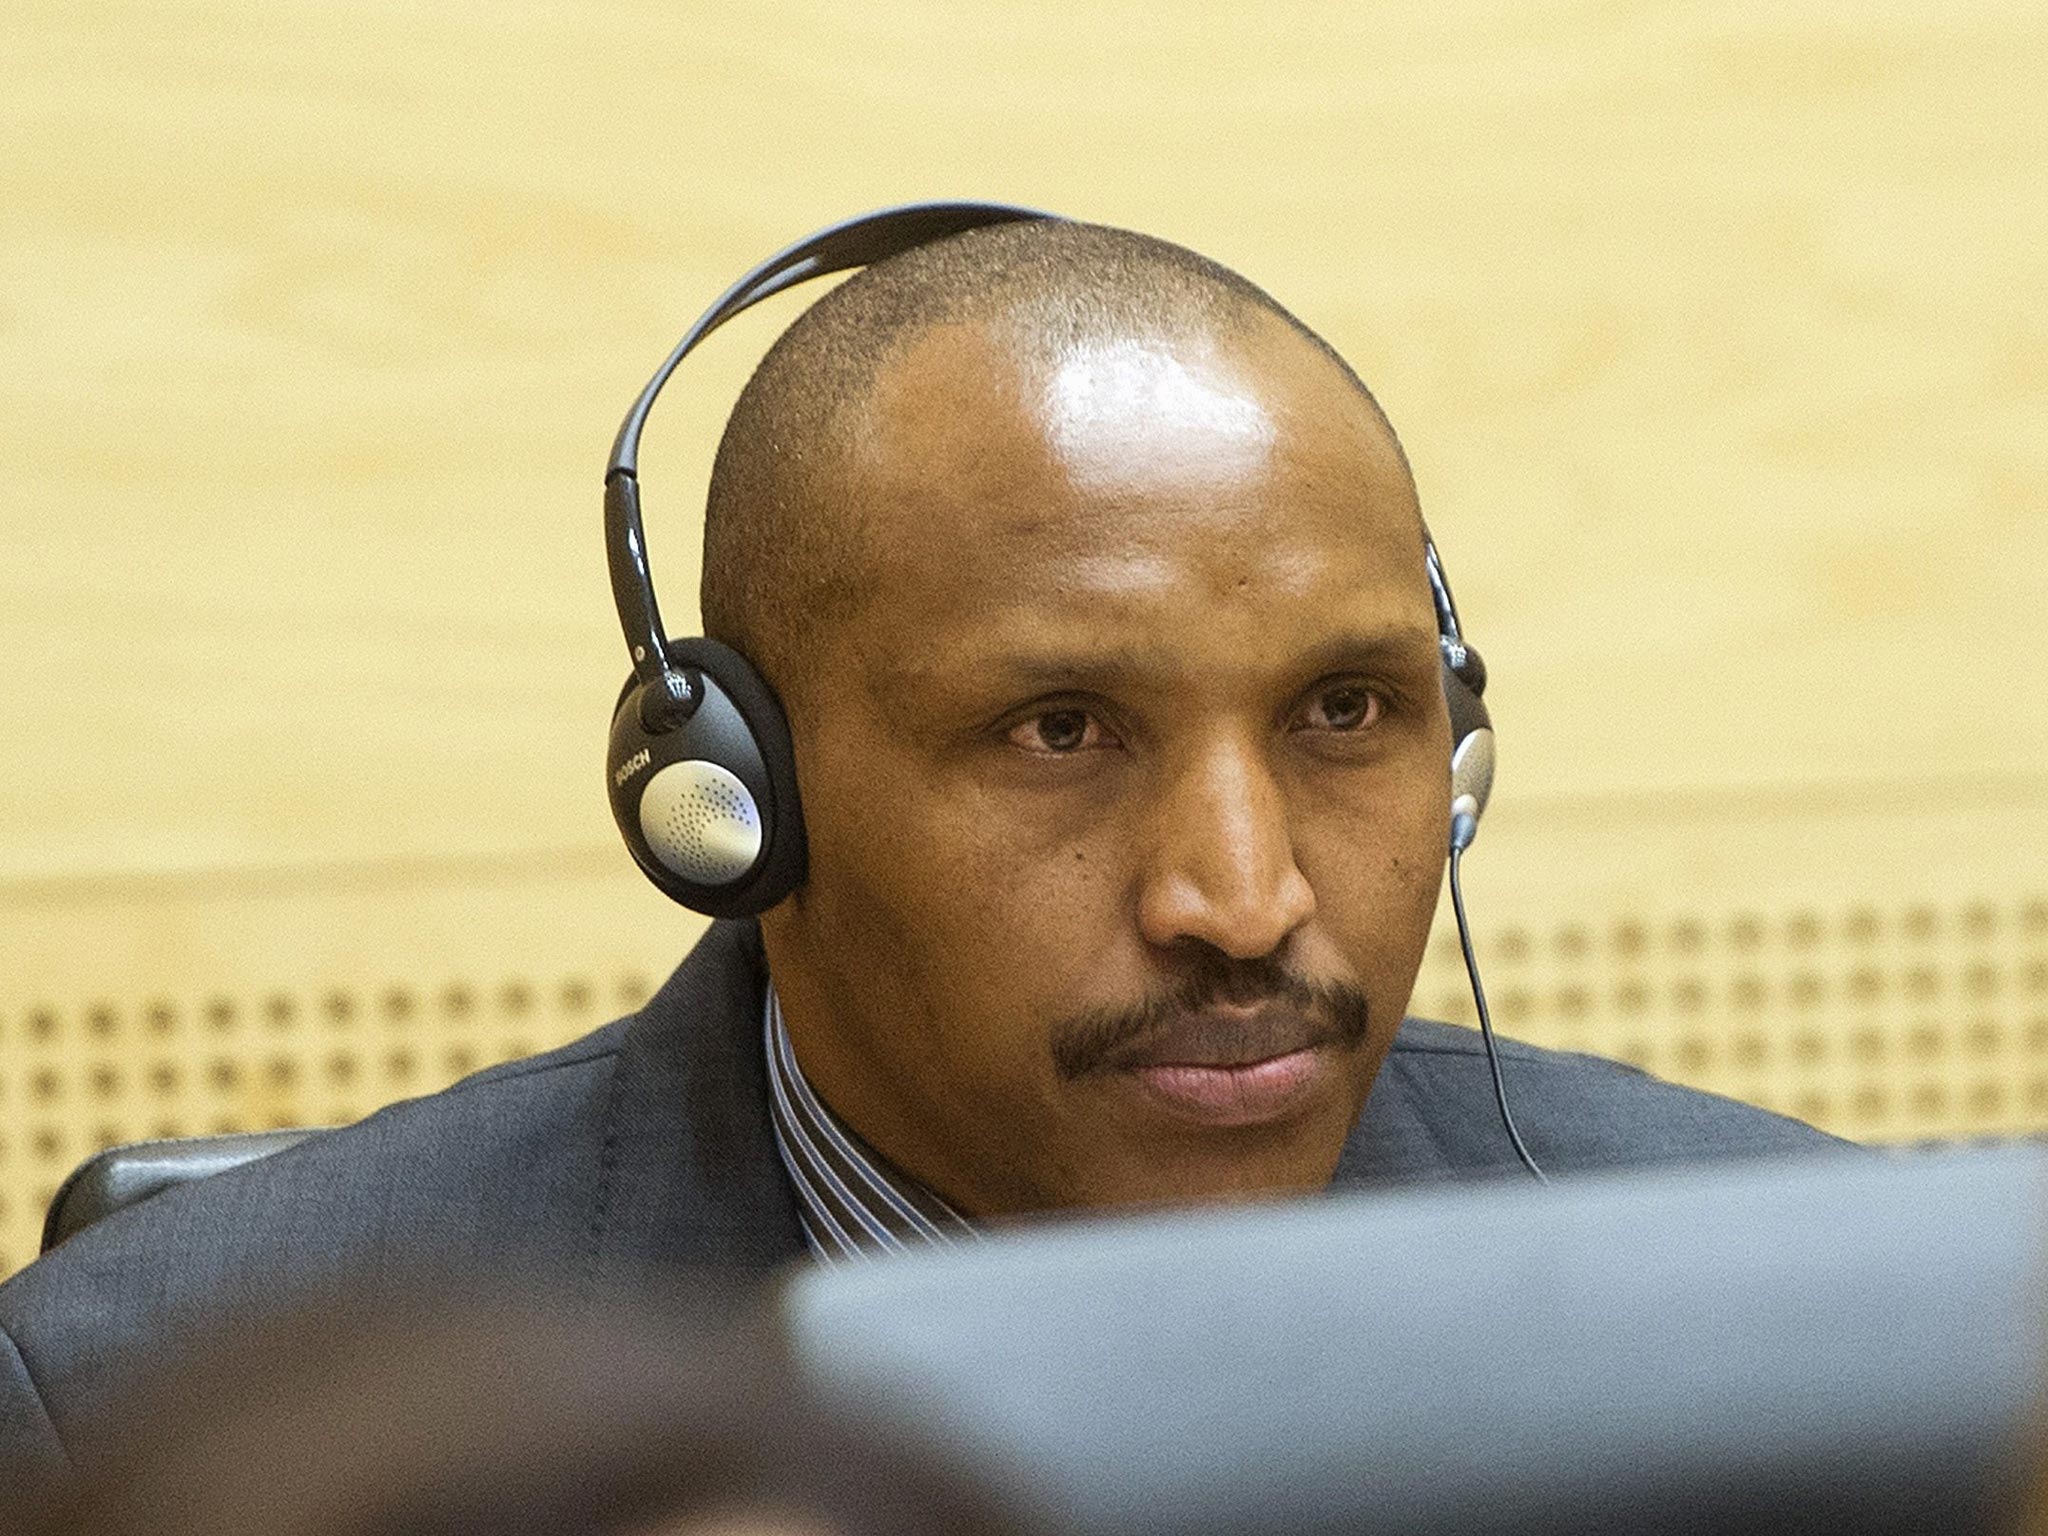 Congolese militia leader Bosco Ntaganda appears at the International Criminal Court charged with war crimes and crimes against humanity in a hearing in The Hague